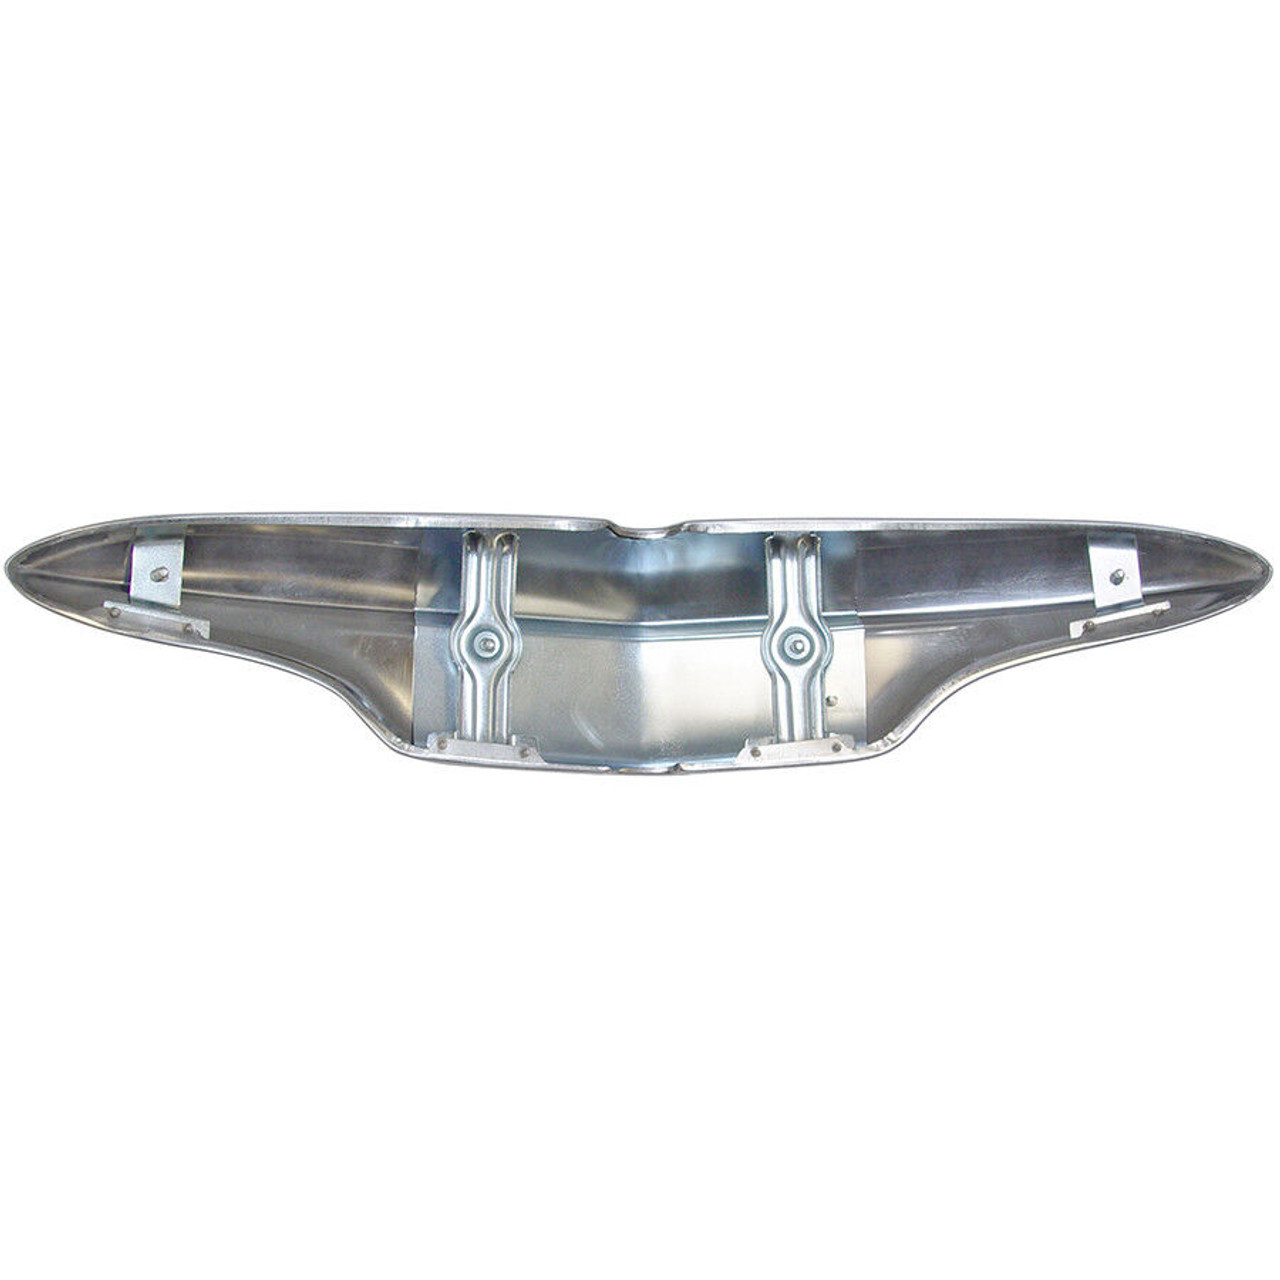 1954-1955 1st Series Chevy Truck Front Hood Emblem Polished Stainless Steel with Painted Details